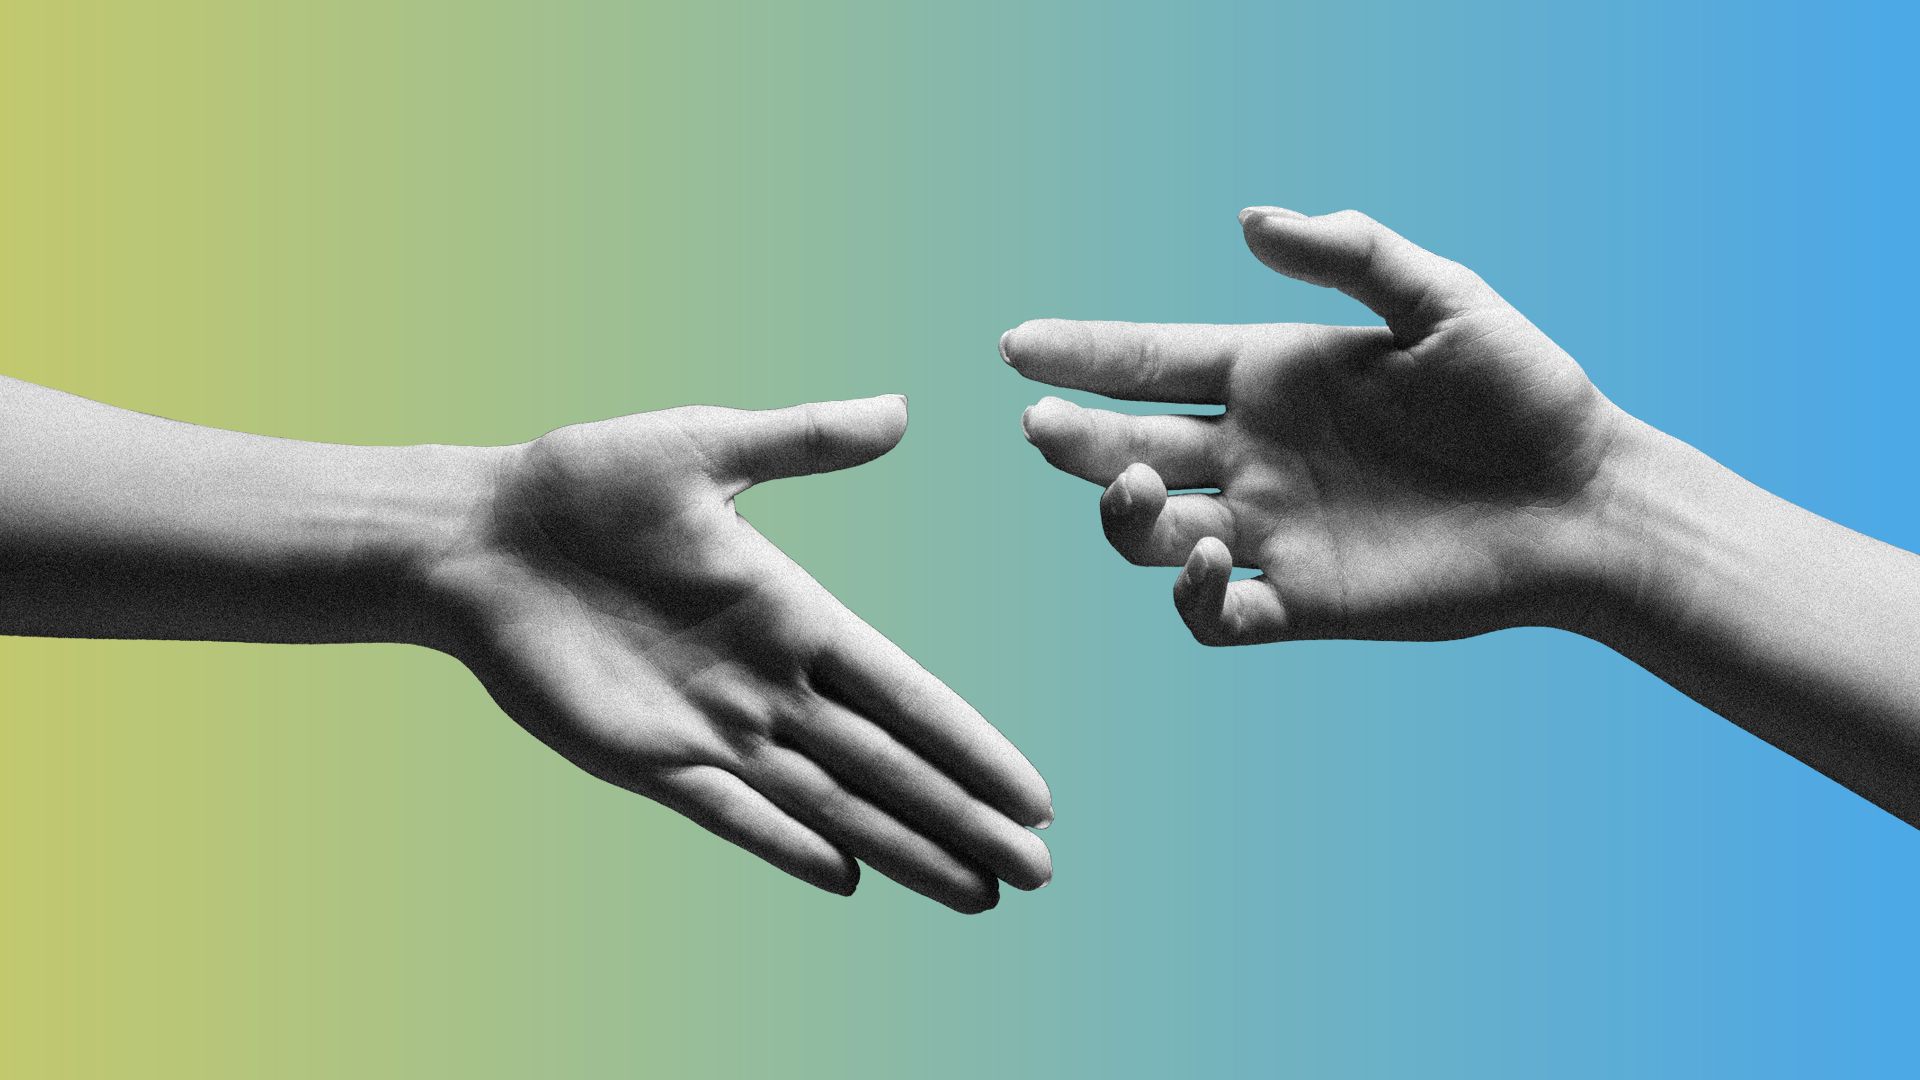 Illustration of two hands reaching out but not completing a handshake